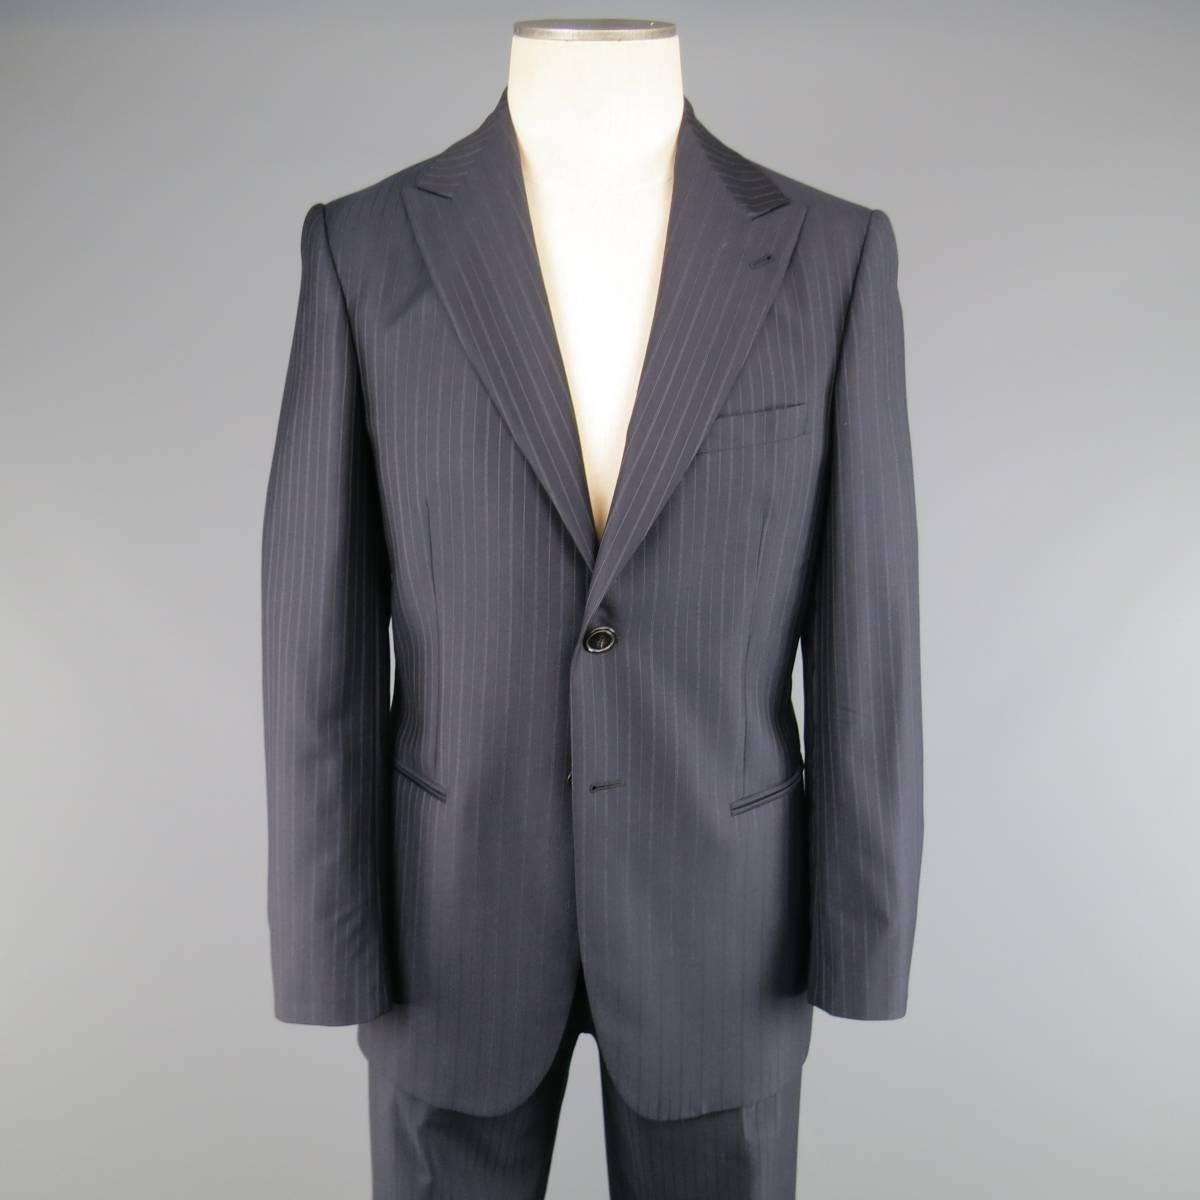 GIORGIO ARMANI suit in a navy blue wool with brown multi pinstraipe pattern includea a two button, notch lapel sport coat and flat front dress pants. Made in Italy.
 
Excellent Pre-Owned Condition.
Marked: IT 48
 
Measurements:
 
-Jacket
Shoulder: